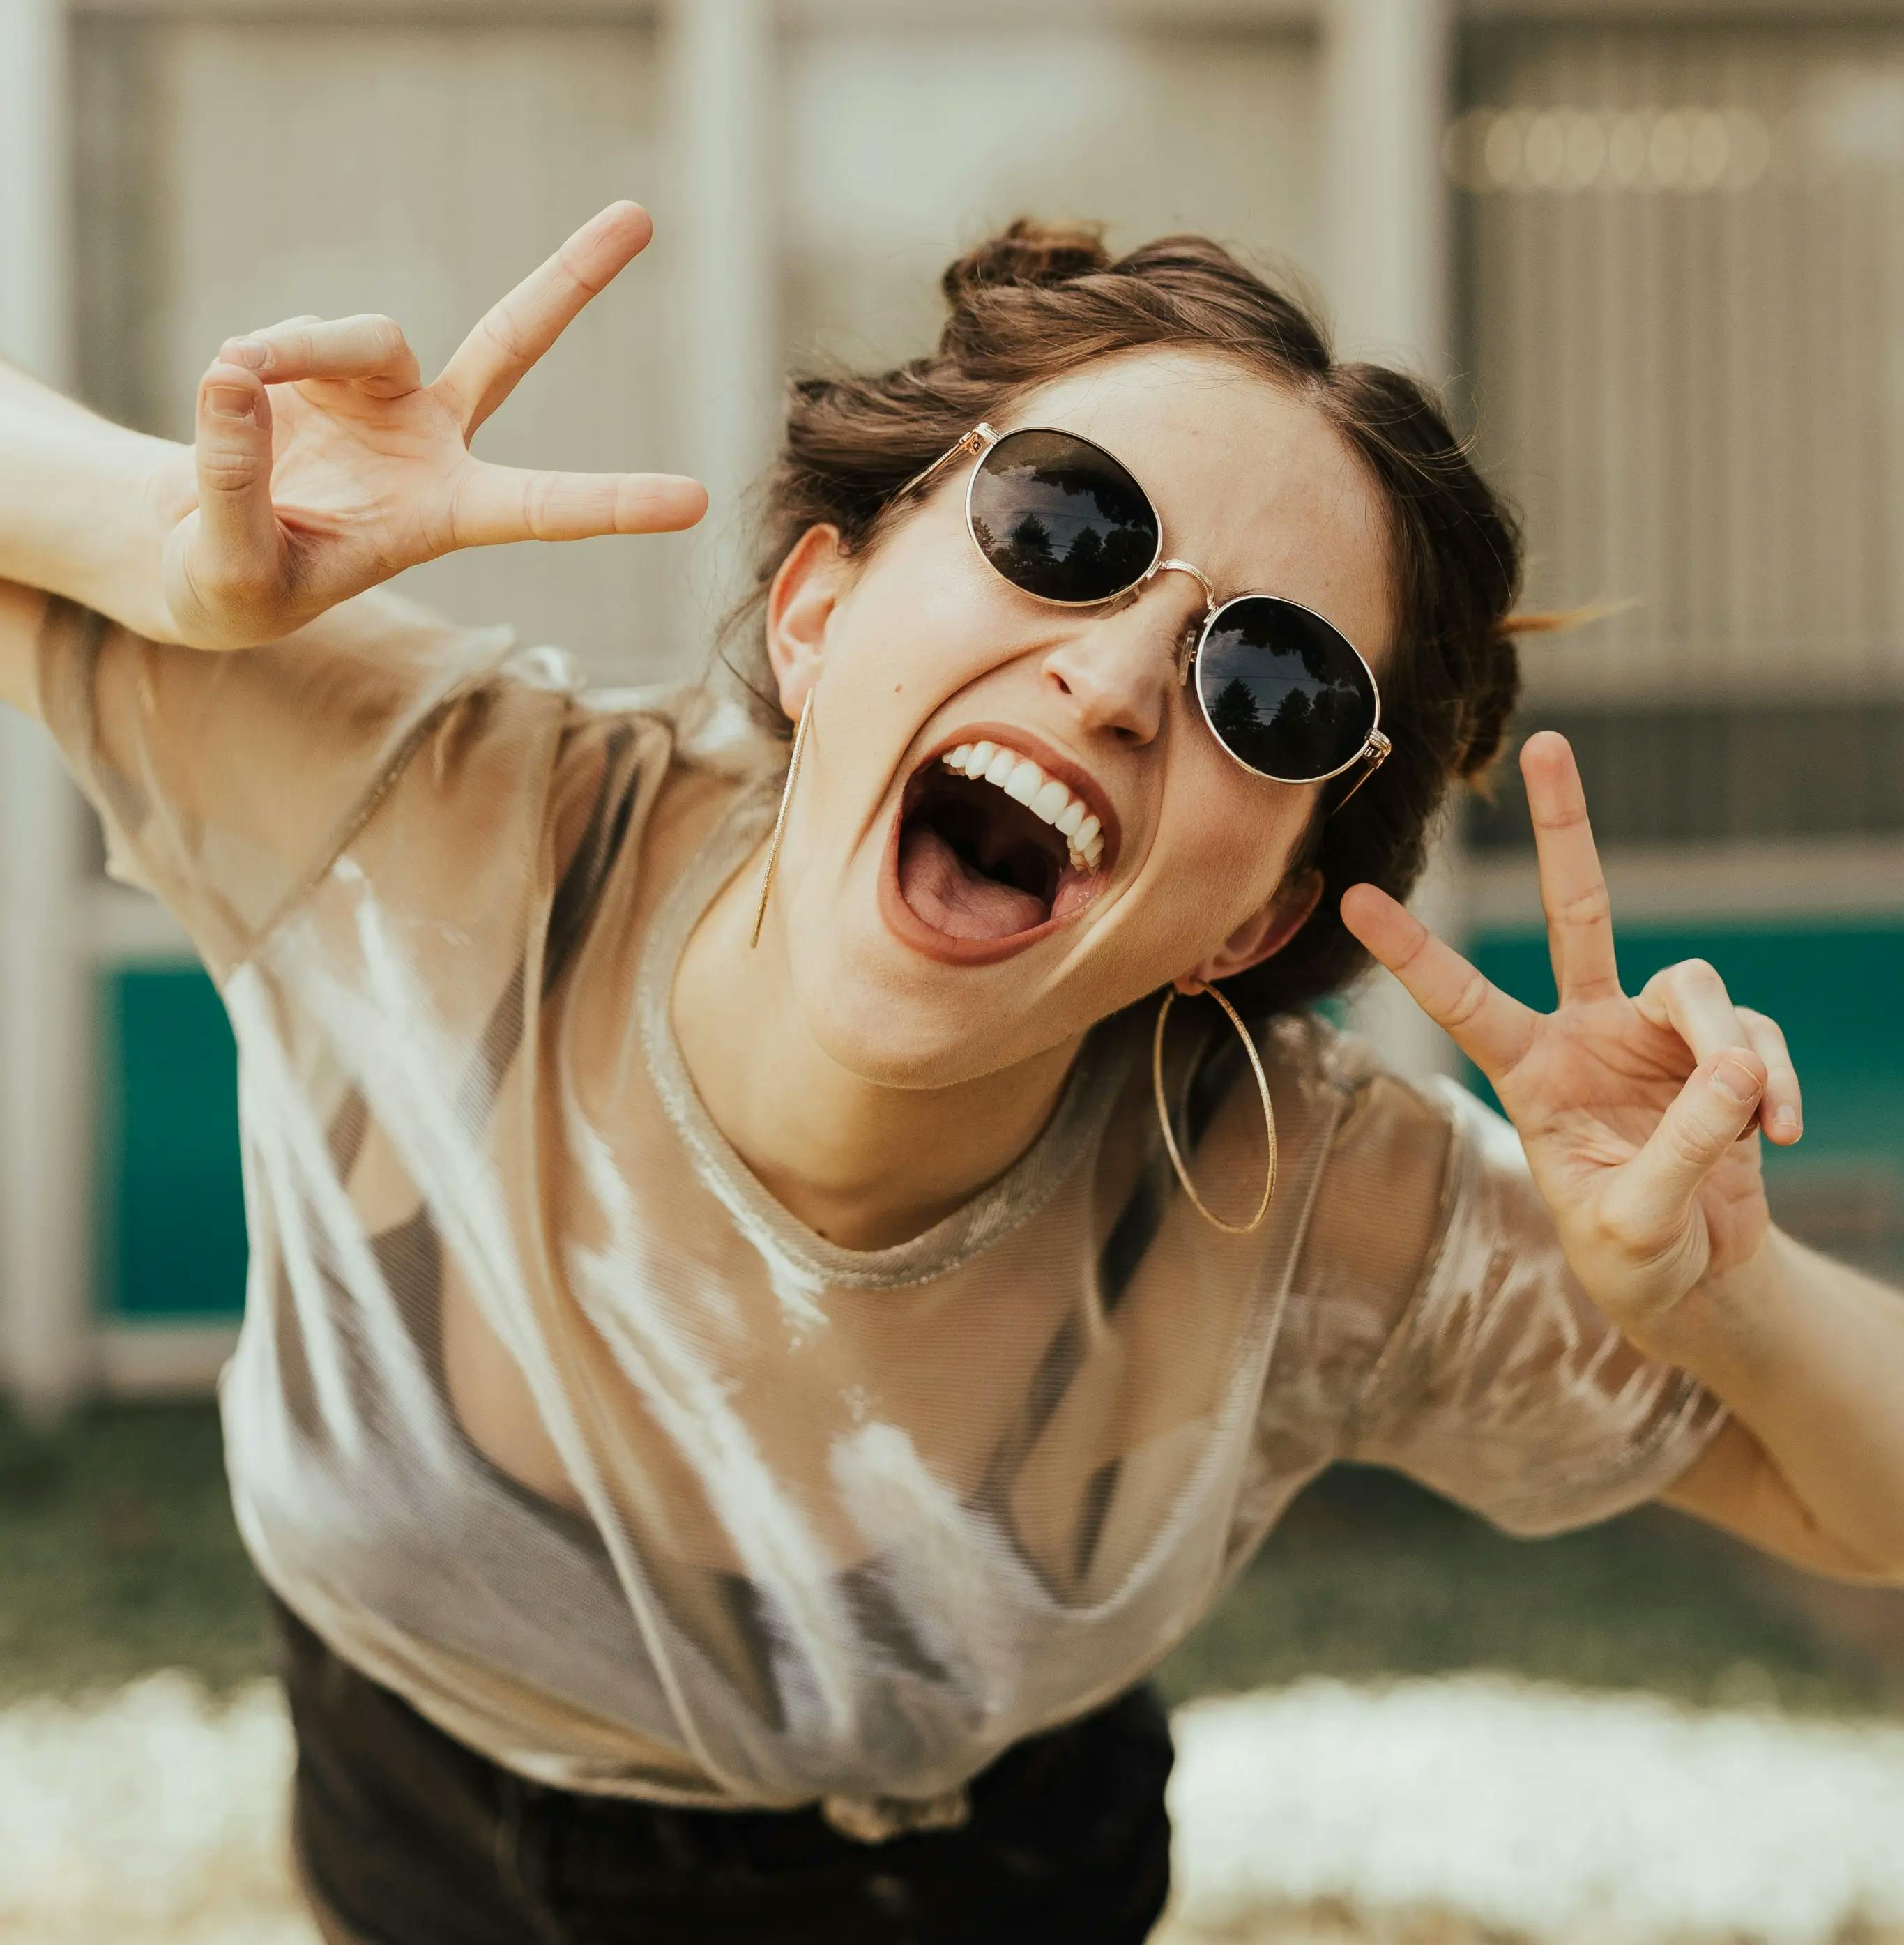 A smiling girl wearing sunglasses, making the peace symbol with both hands.